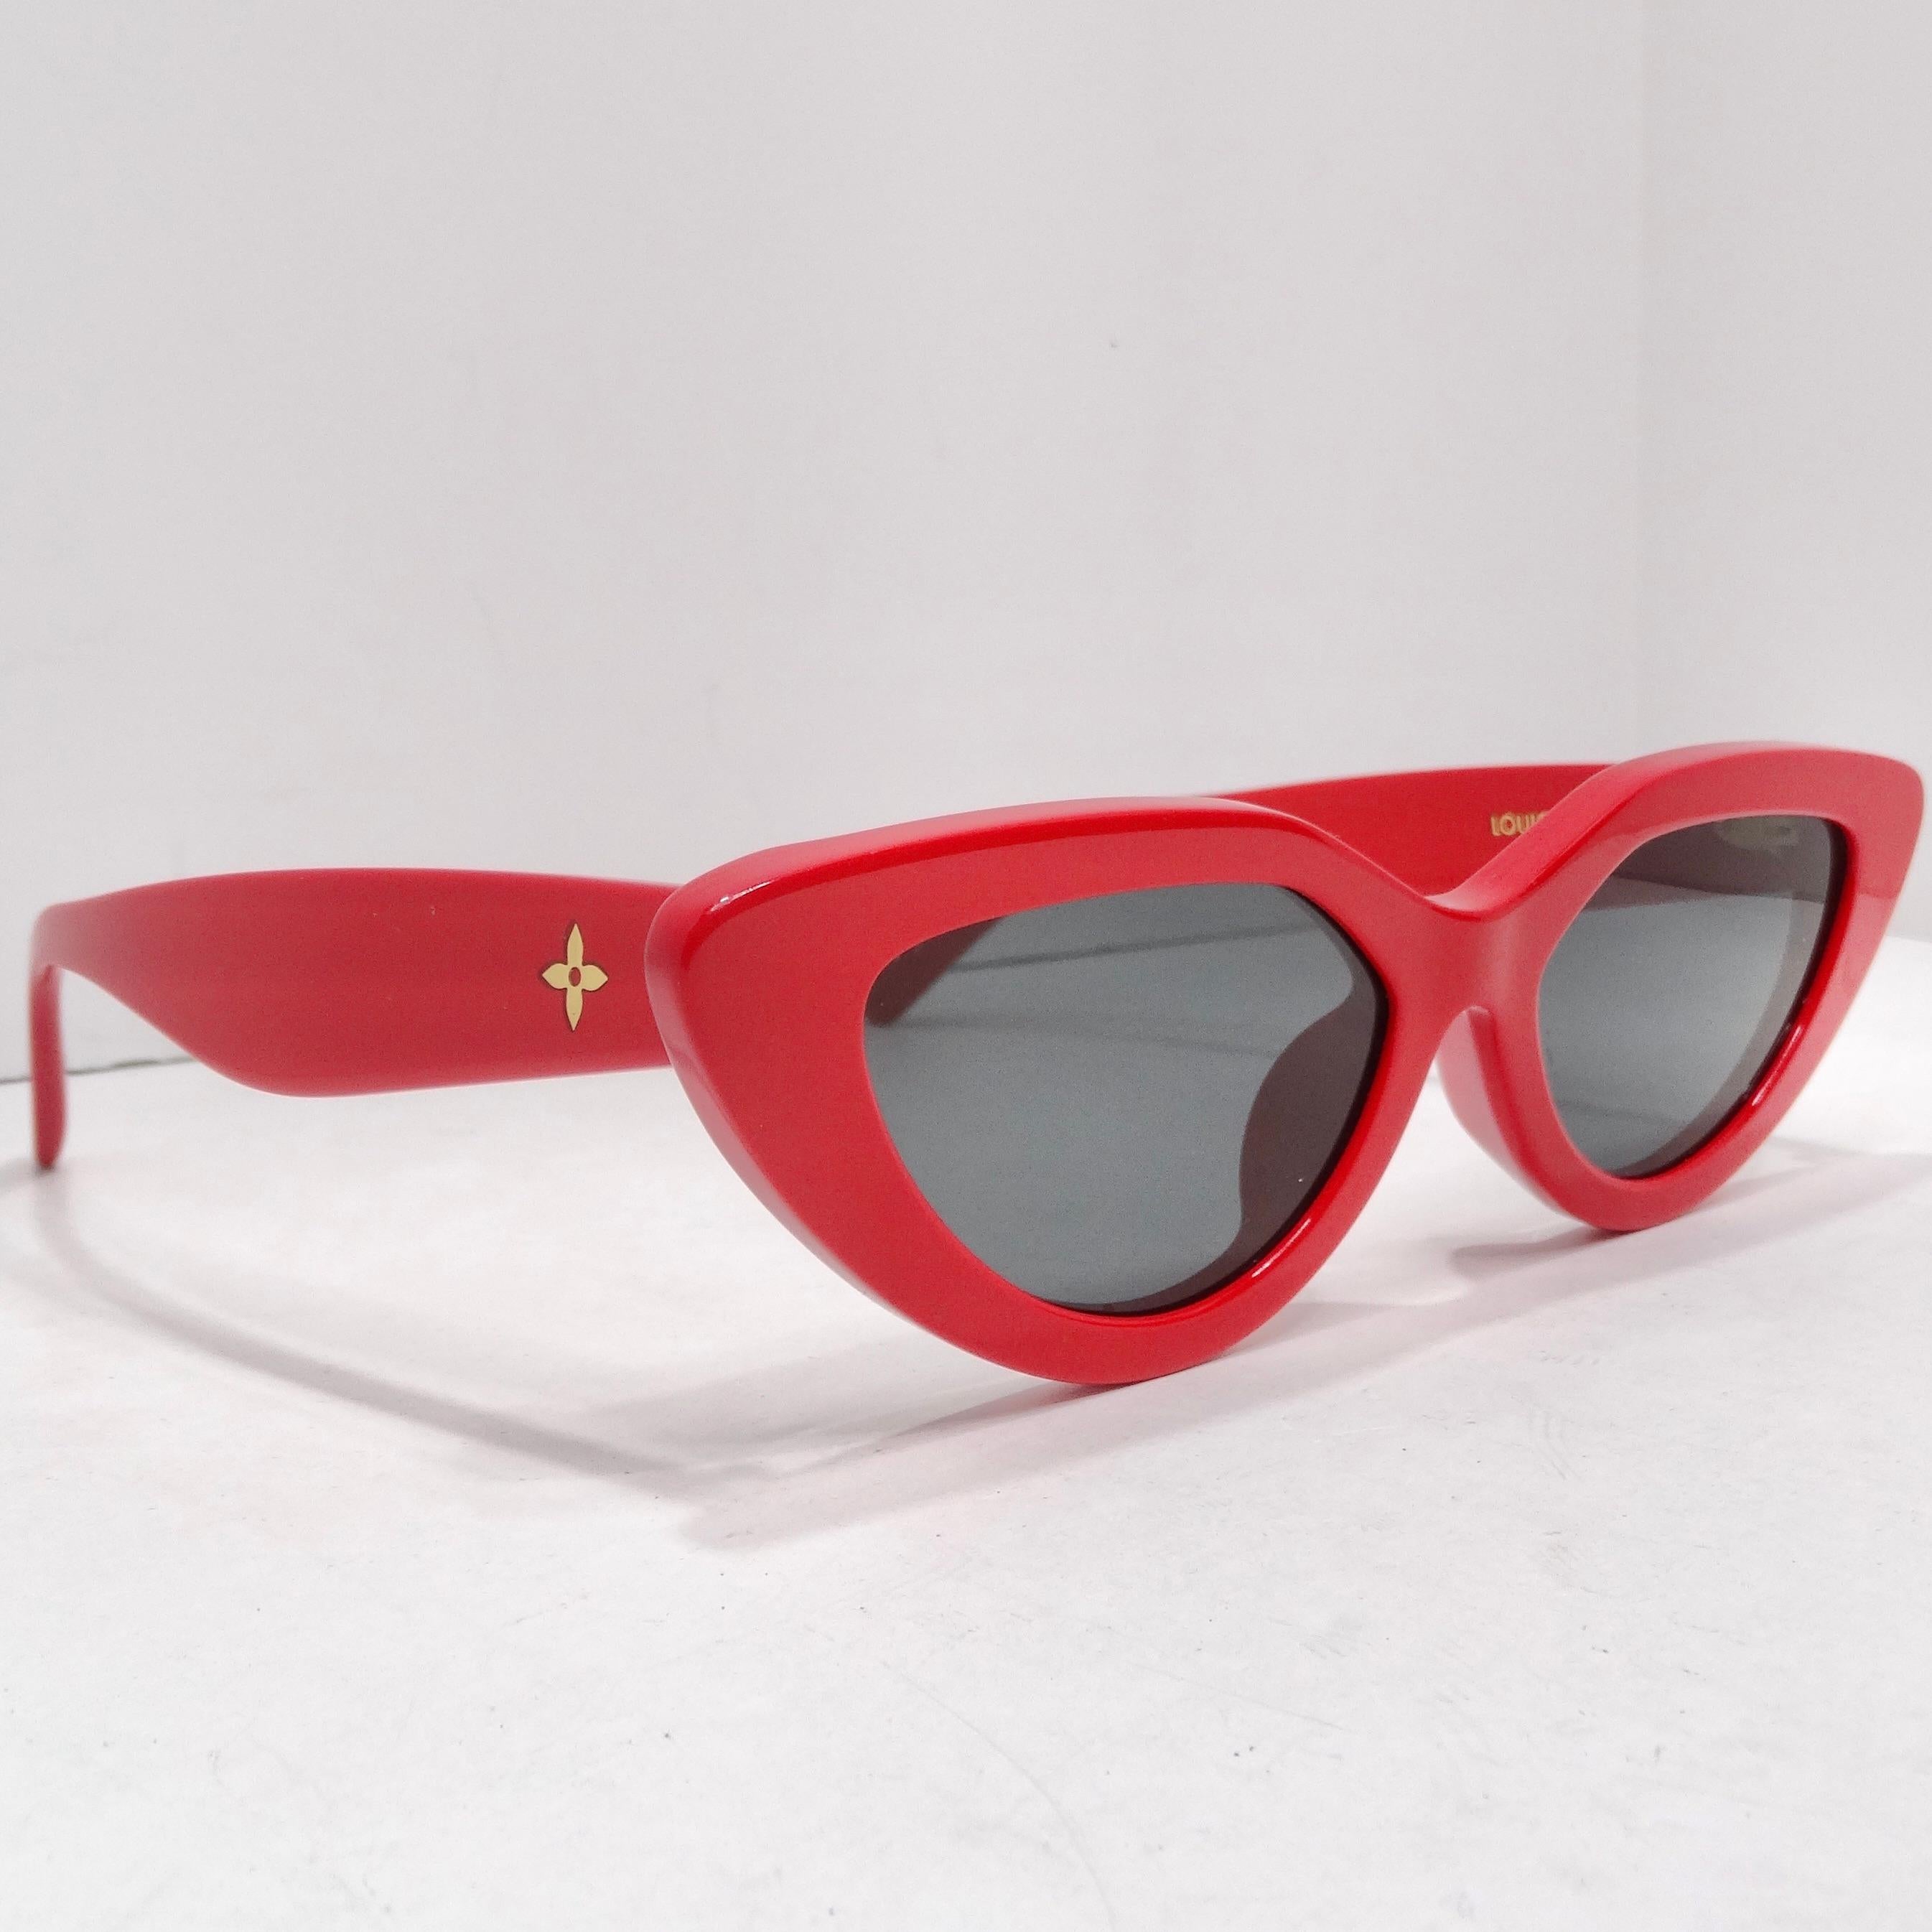 Get your hands on the Louis Vuitton My LV Cat Eye Sunglasses in Red – a bold and stylish accessory that effortlessly combines luxury and fashion-forward design. Elevate your eyewear collection with these statement sunglasses featuring red cat-eye